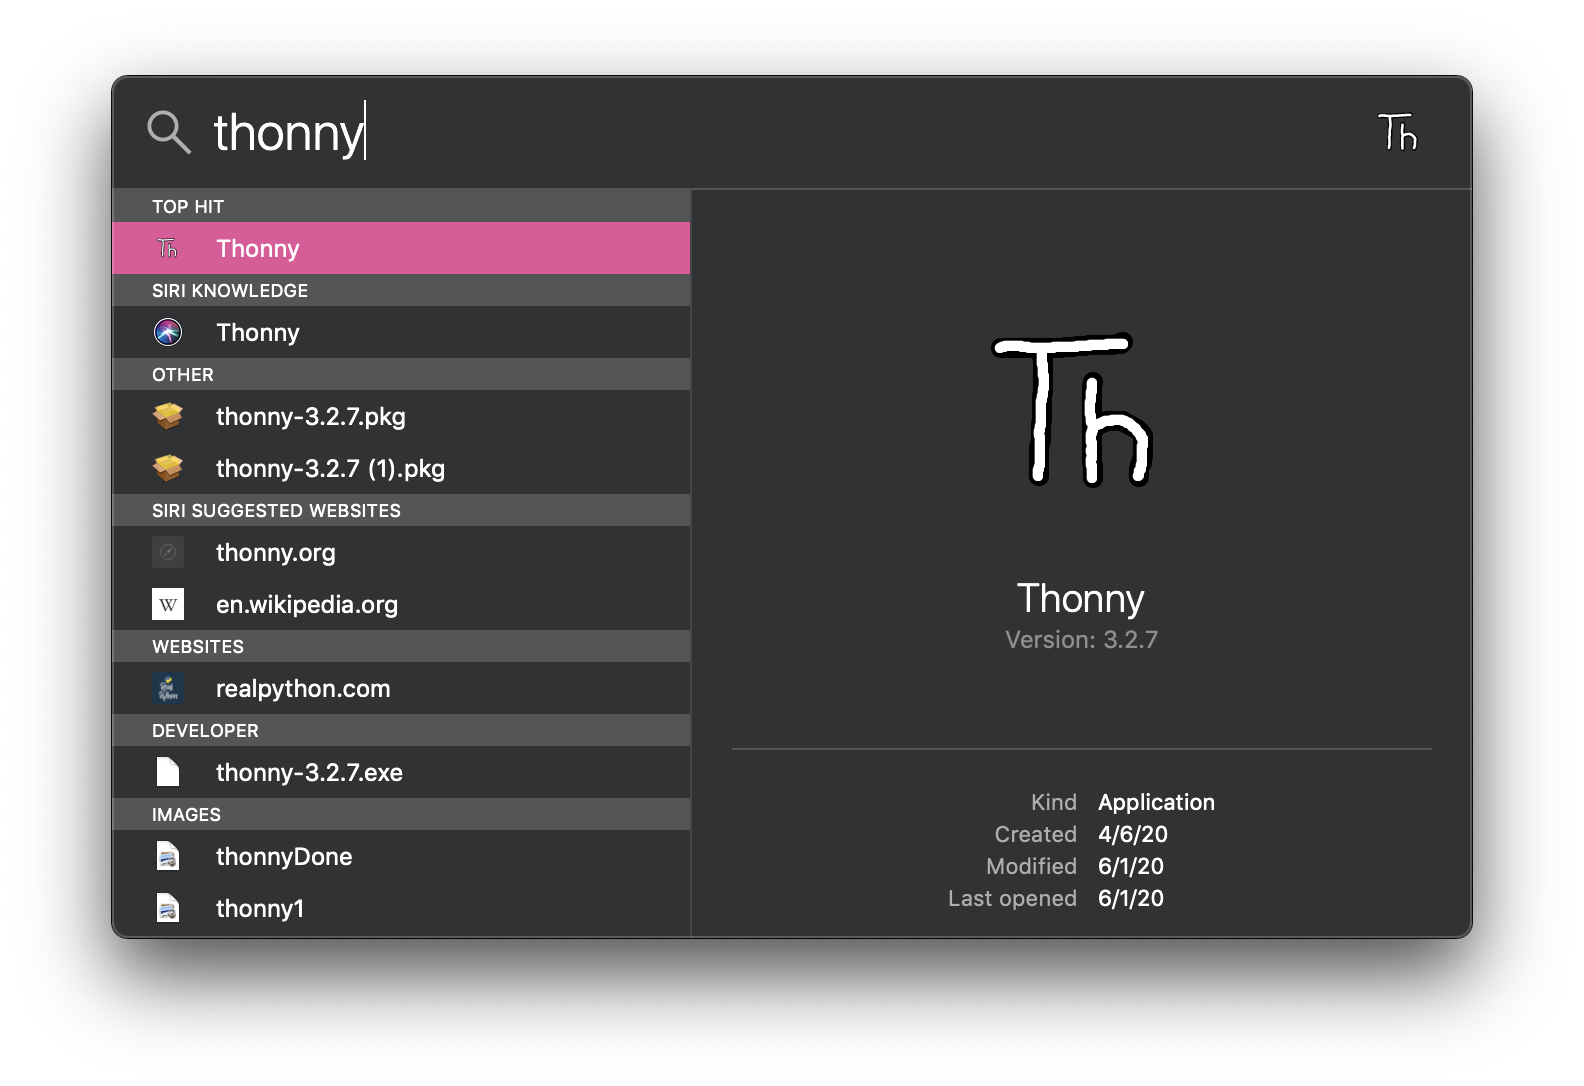 Screenshot showing the use of Spotlight (on a Mac) to open Thonny, with the text 'thonny' typed in the Spotlight search window and the icon for Thonny being displayed as the top result.